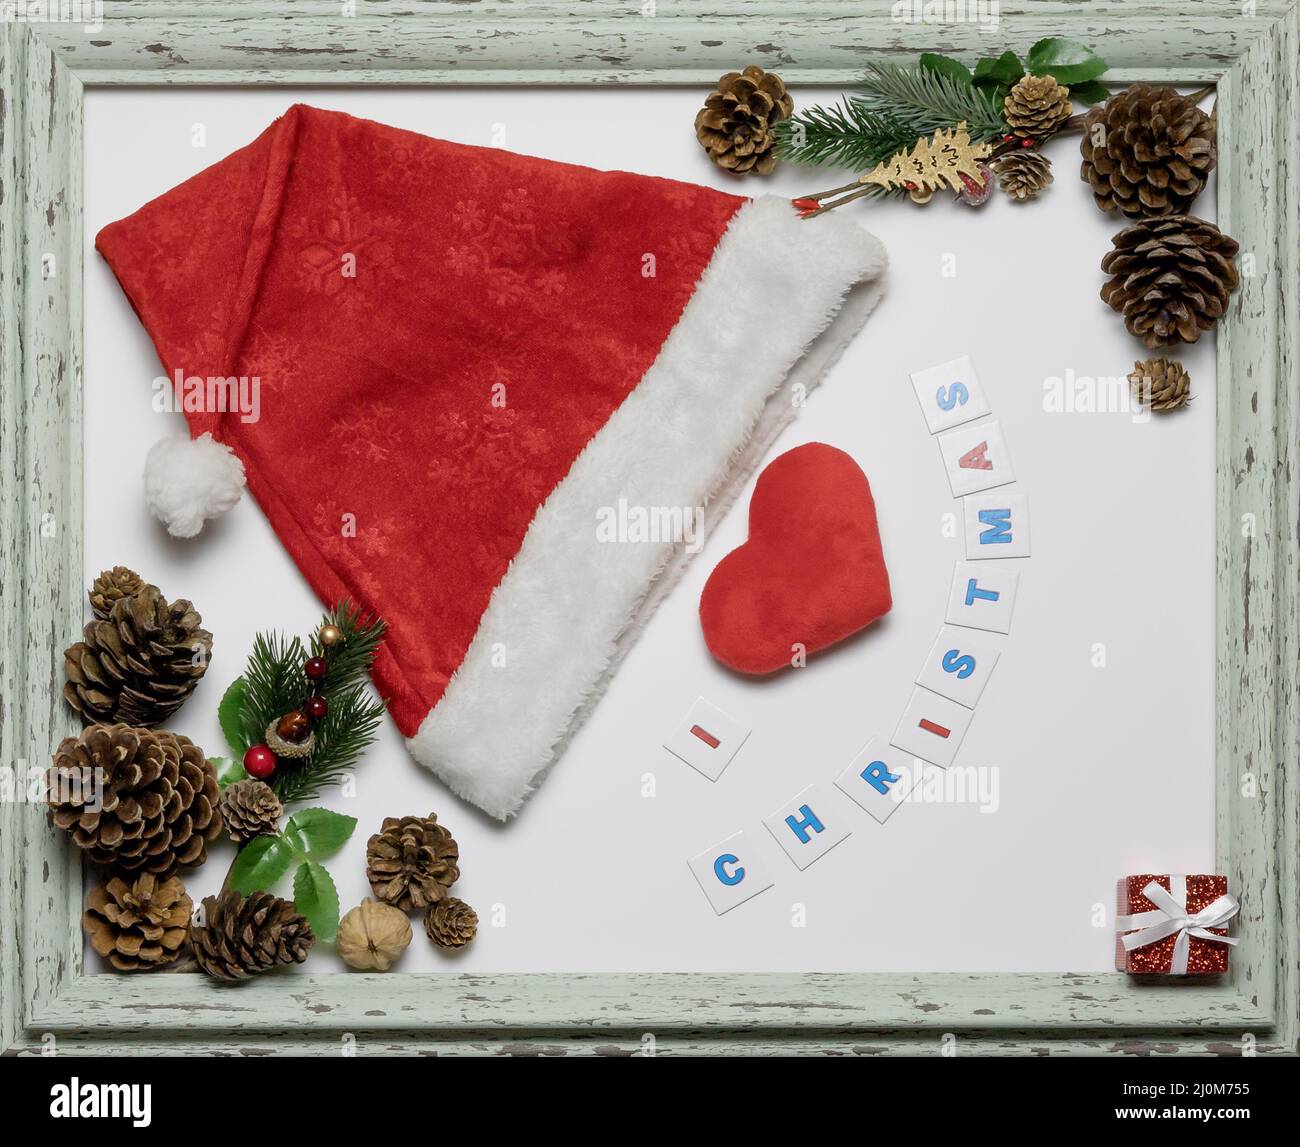 Red cap and heart in a frame with a Christmas inscription and paraphernalia. Christmas themed card. Layout composition Stock Photo